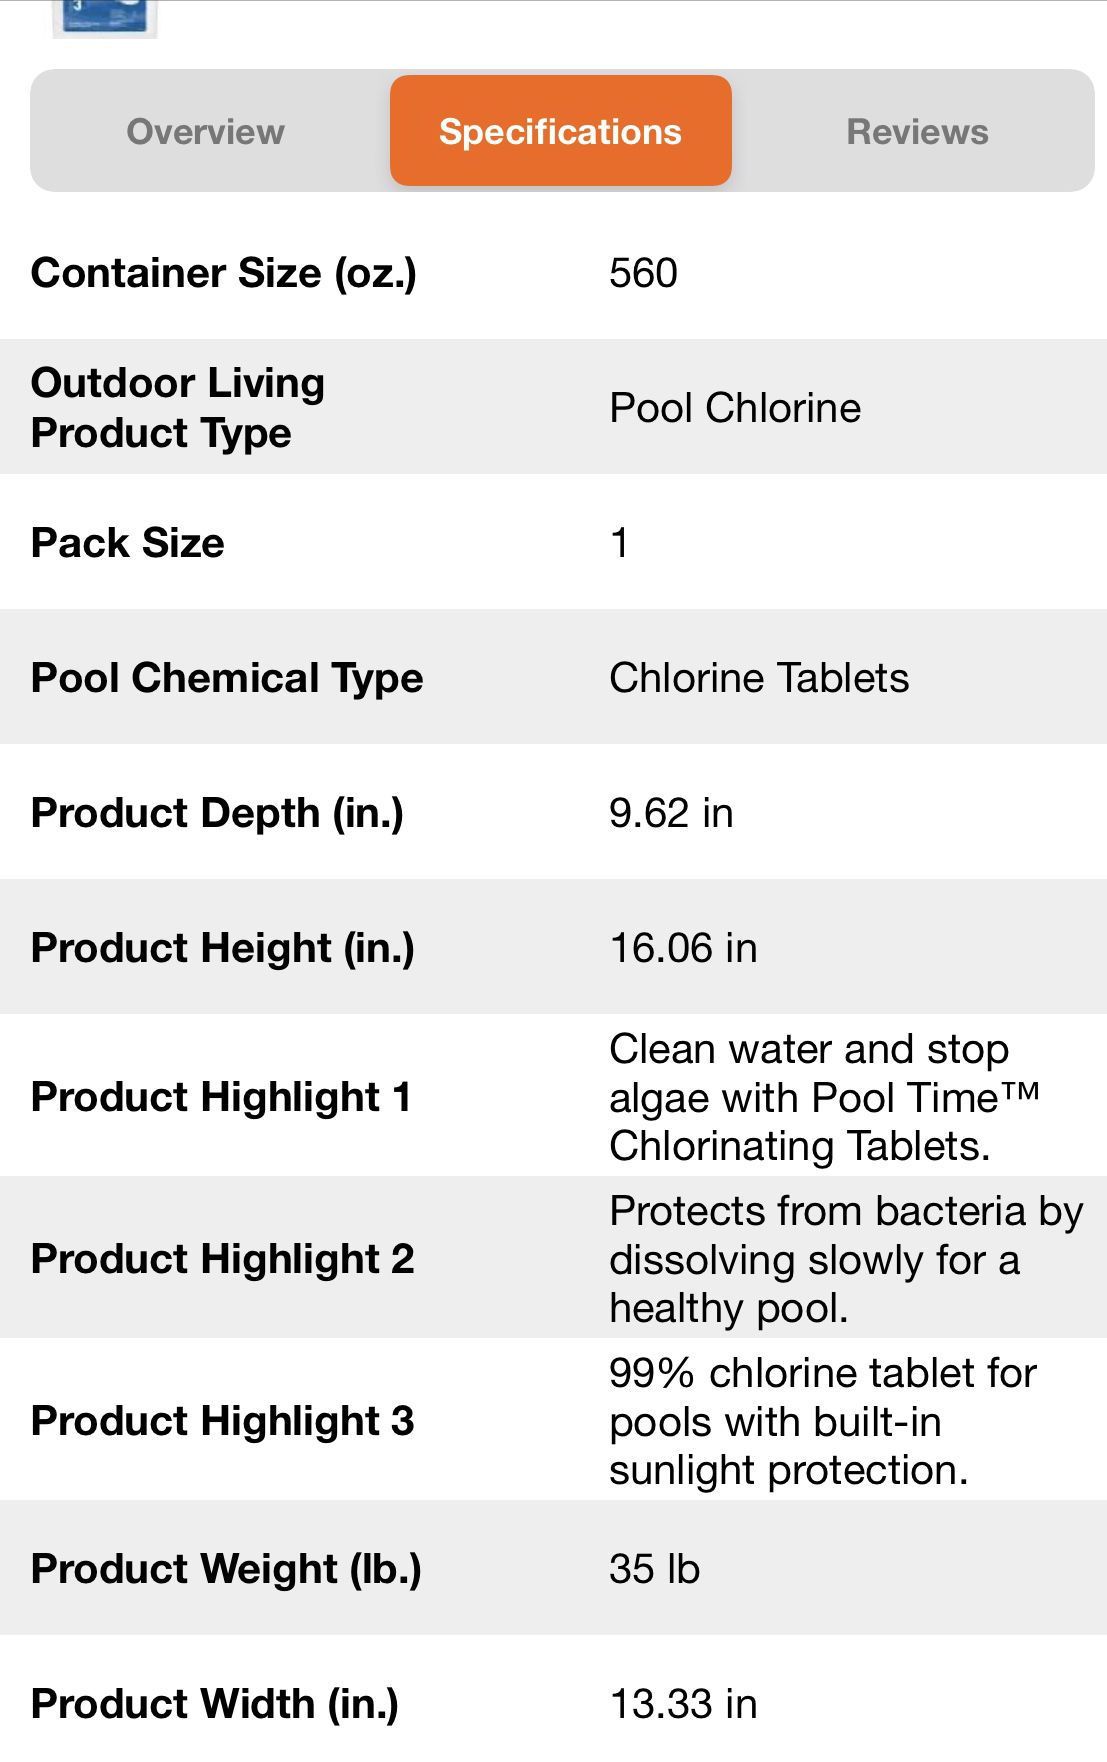 Pool Time 3-in-1 Chlorinating Tablets - About 20 lbs w/ 3” Stabilized Chlorine Tabs